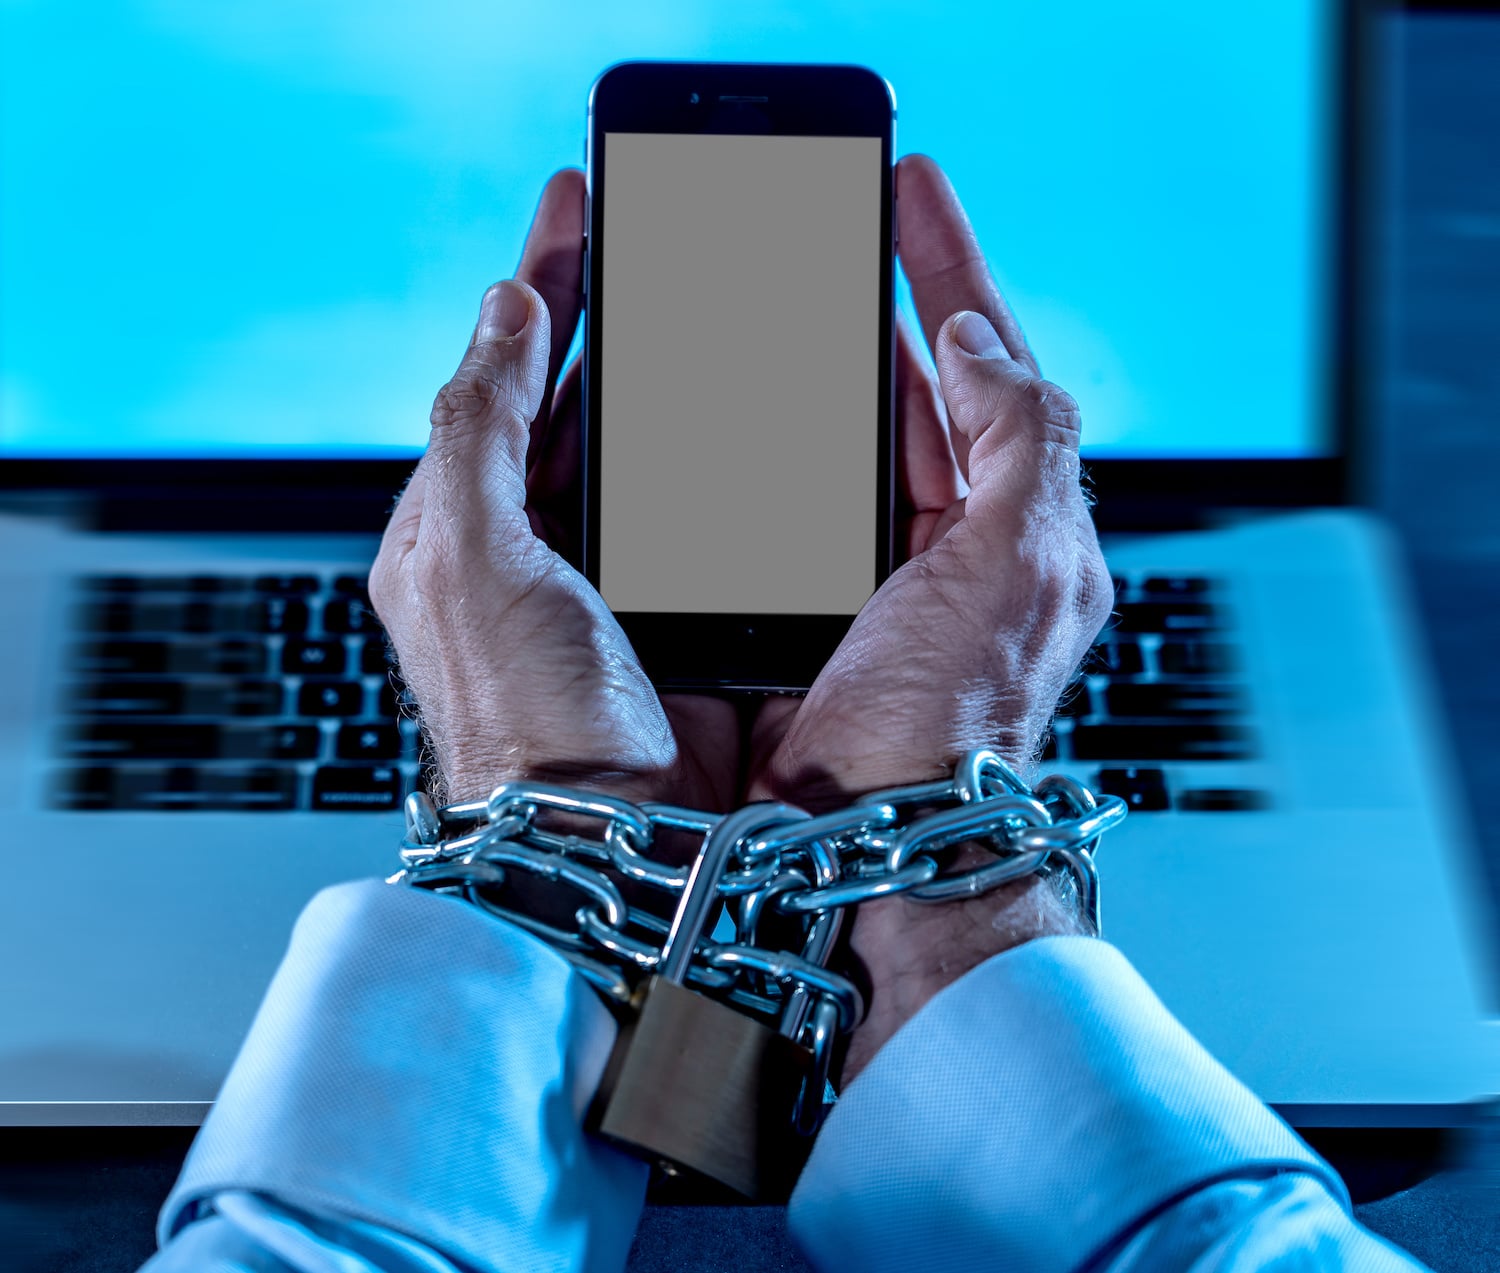 How To Manage Addiction To Technology Importance Of Technology